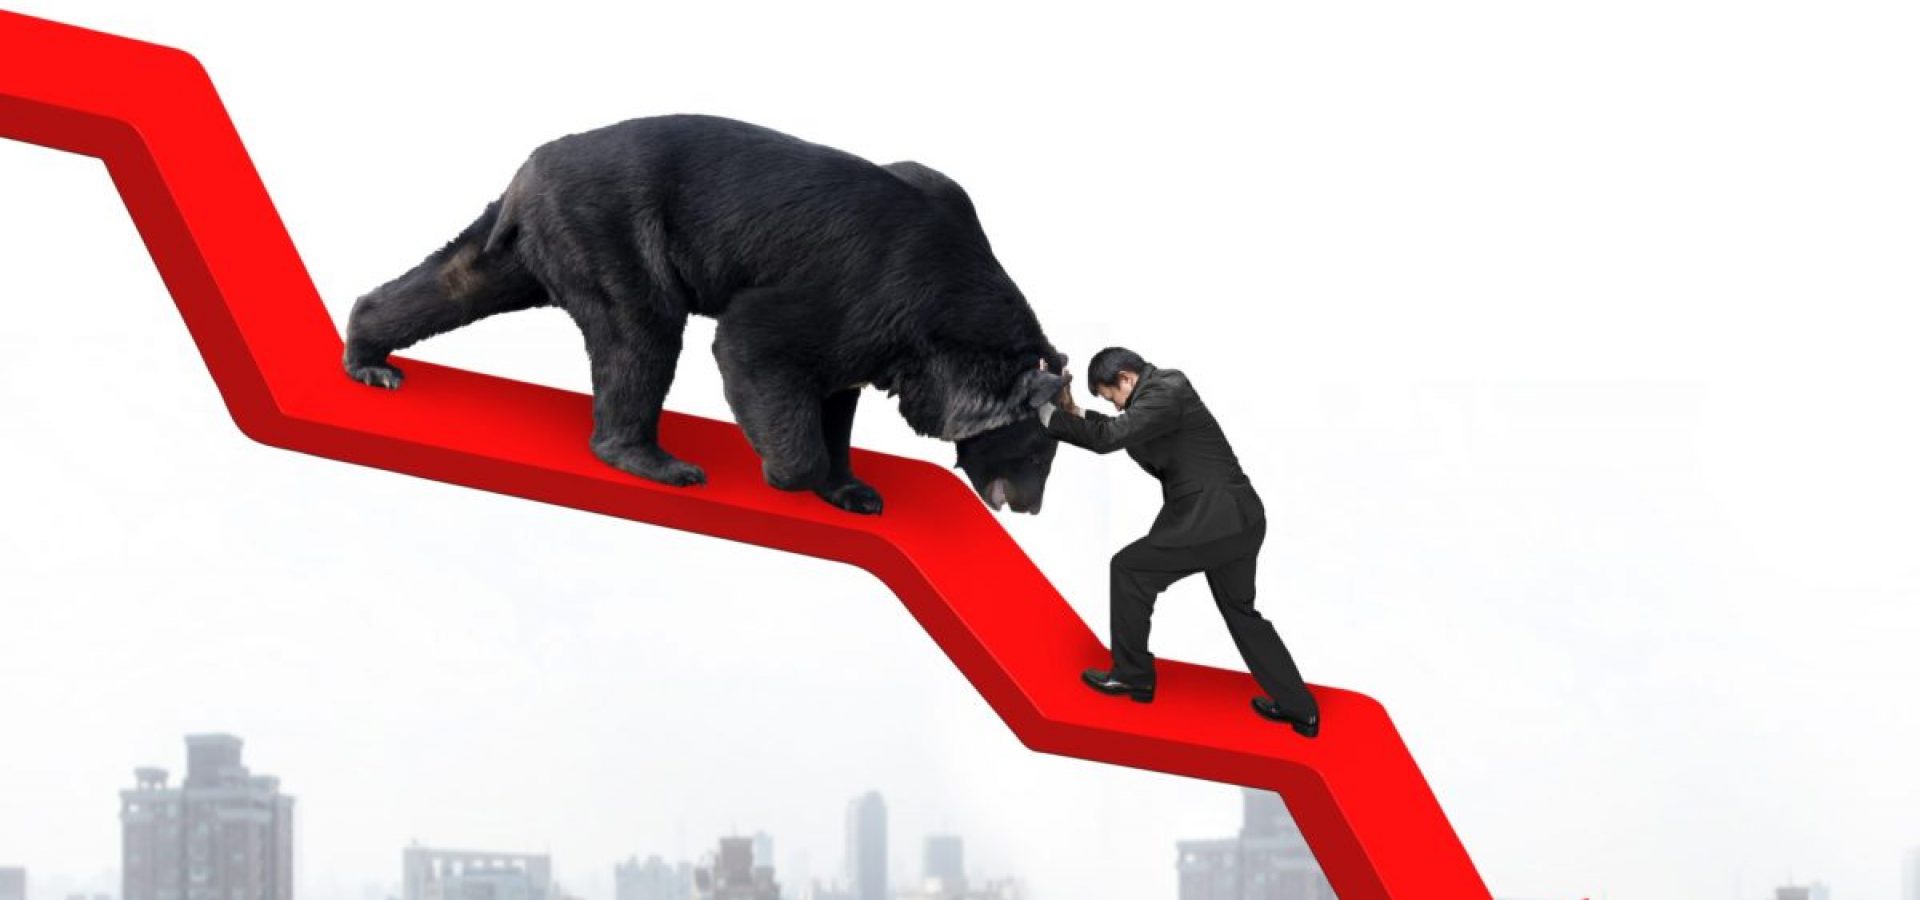 How to trade wisely in the Bear market? 5 essential steps